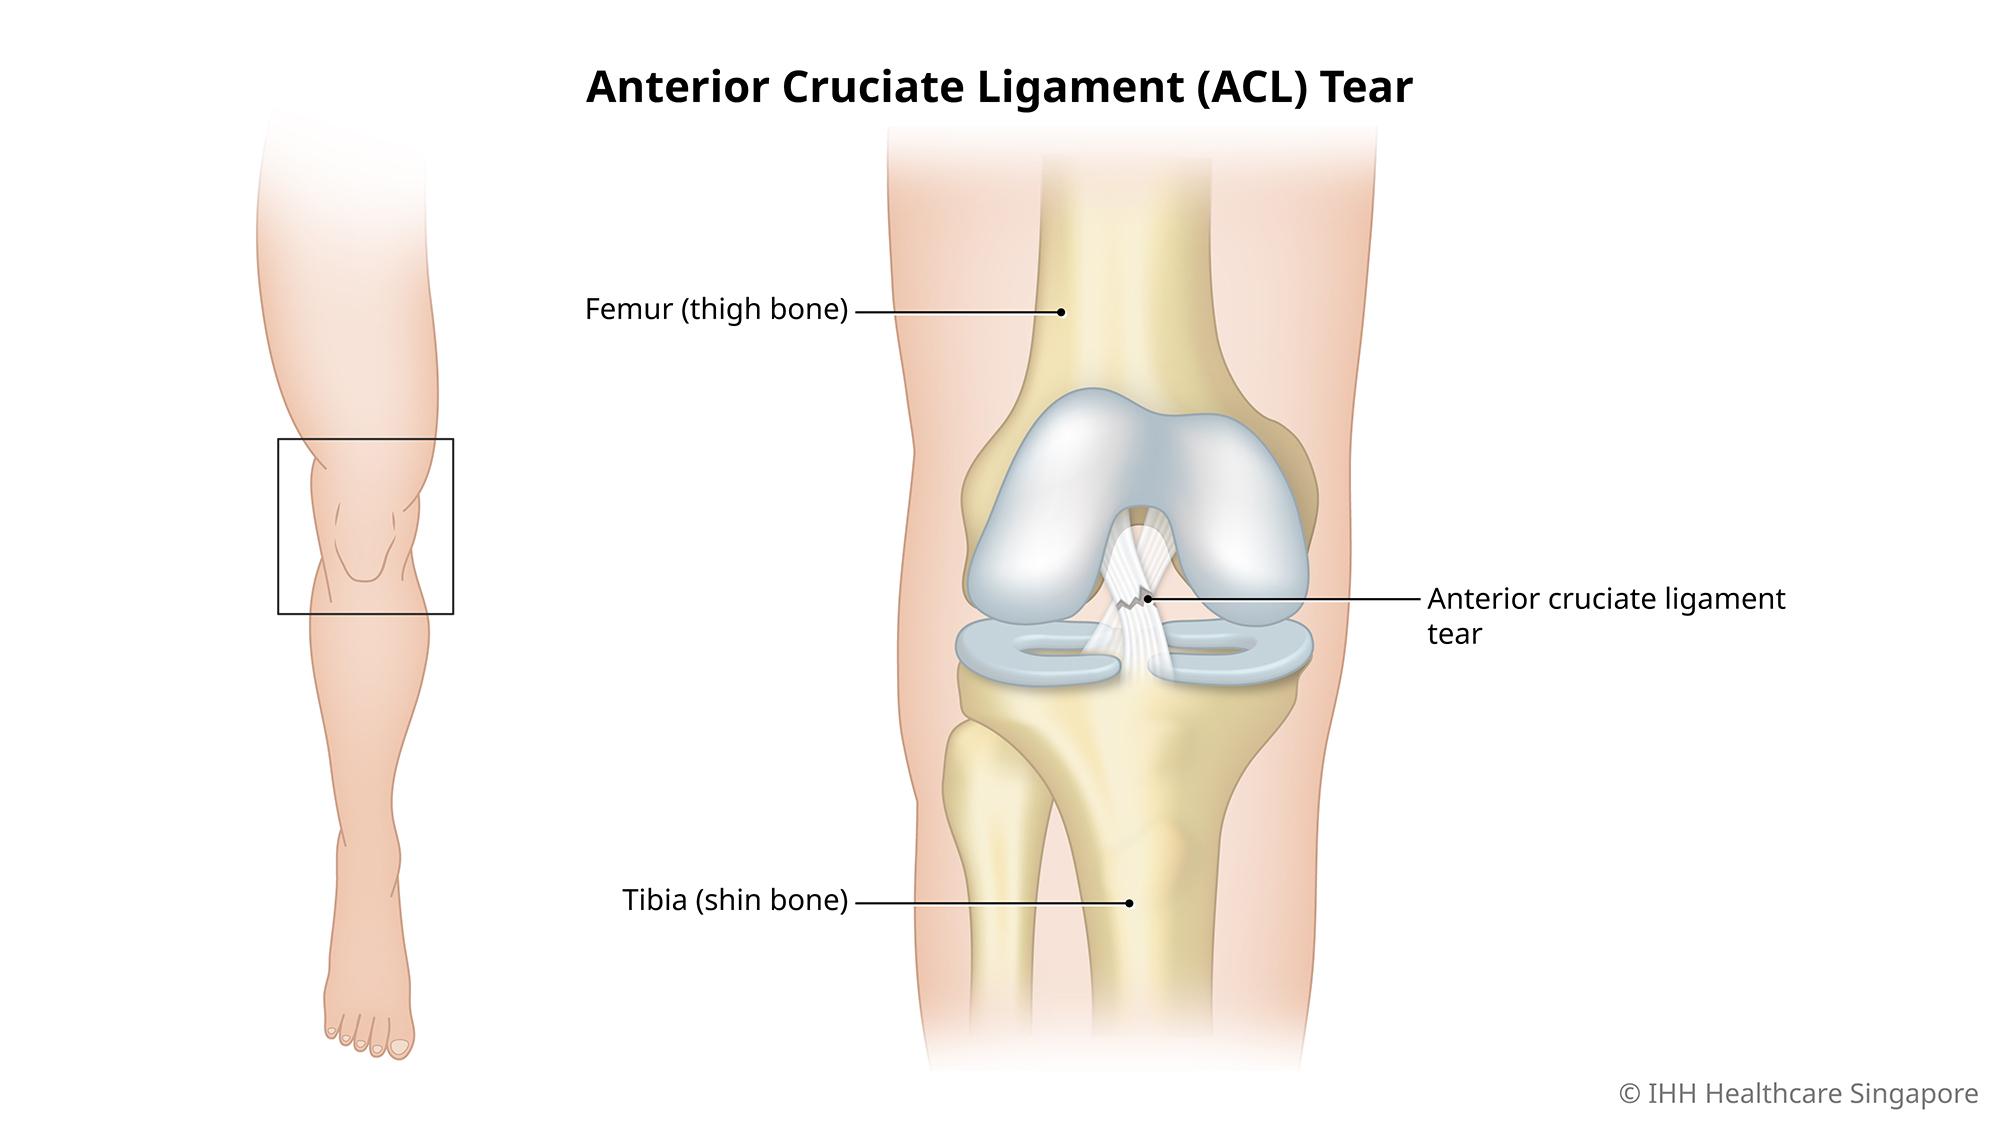 An anterior cruciate ligament (ACL) tear is a partial or complete tear of your knee ligament.